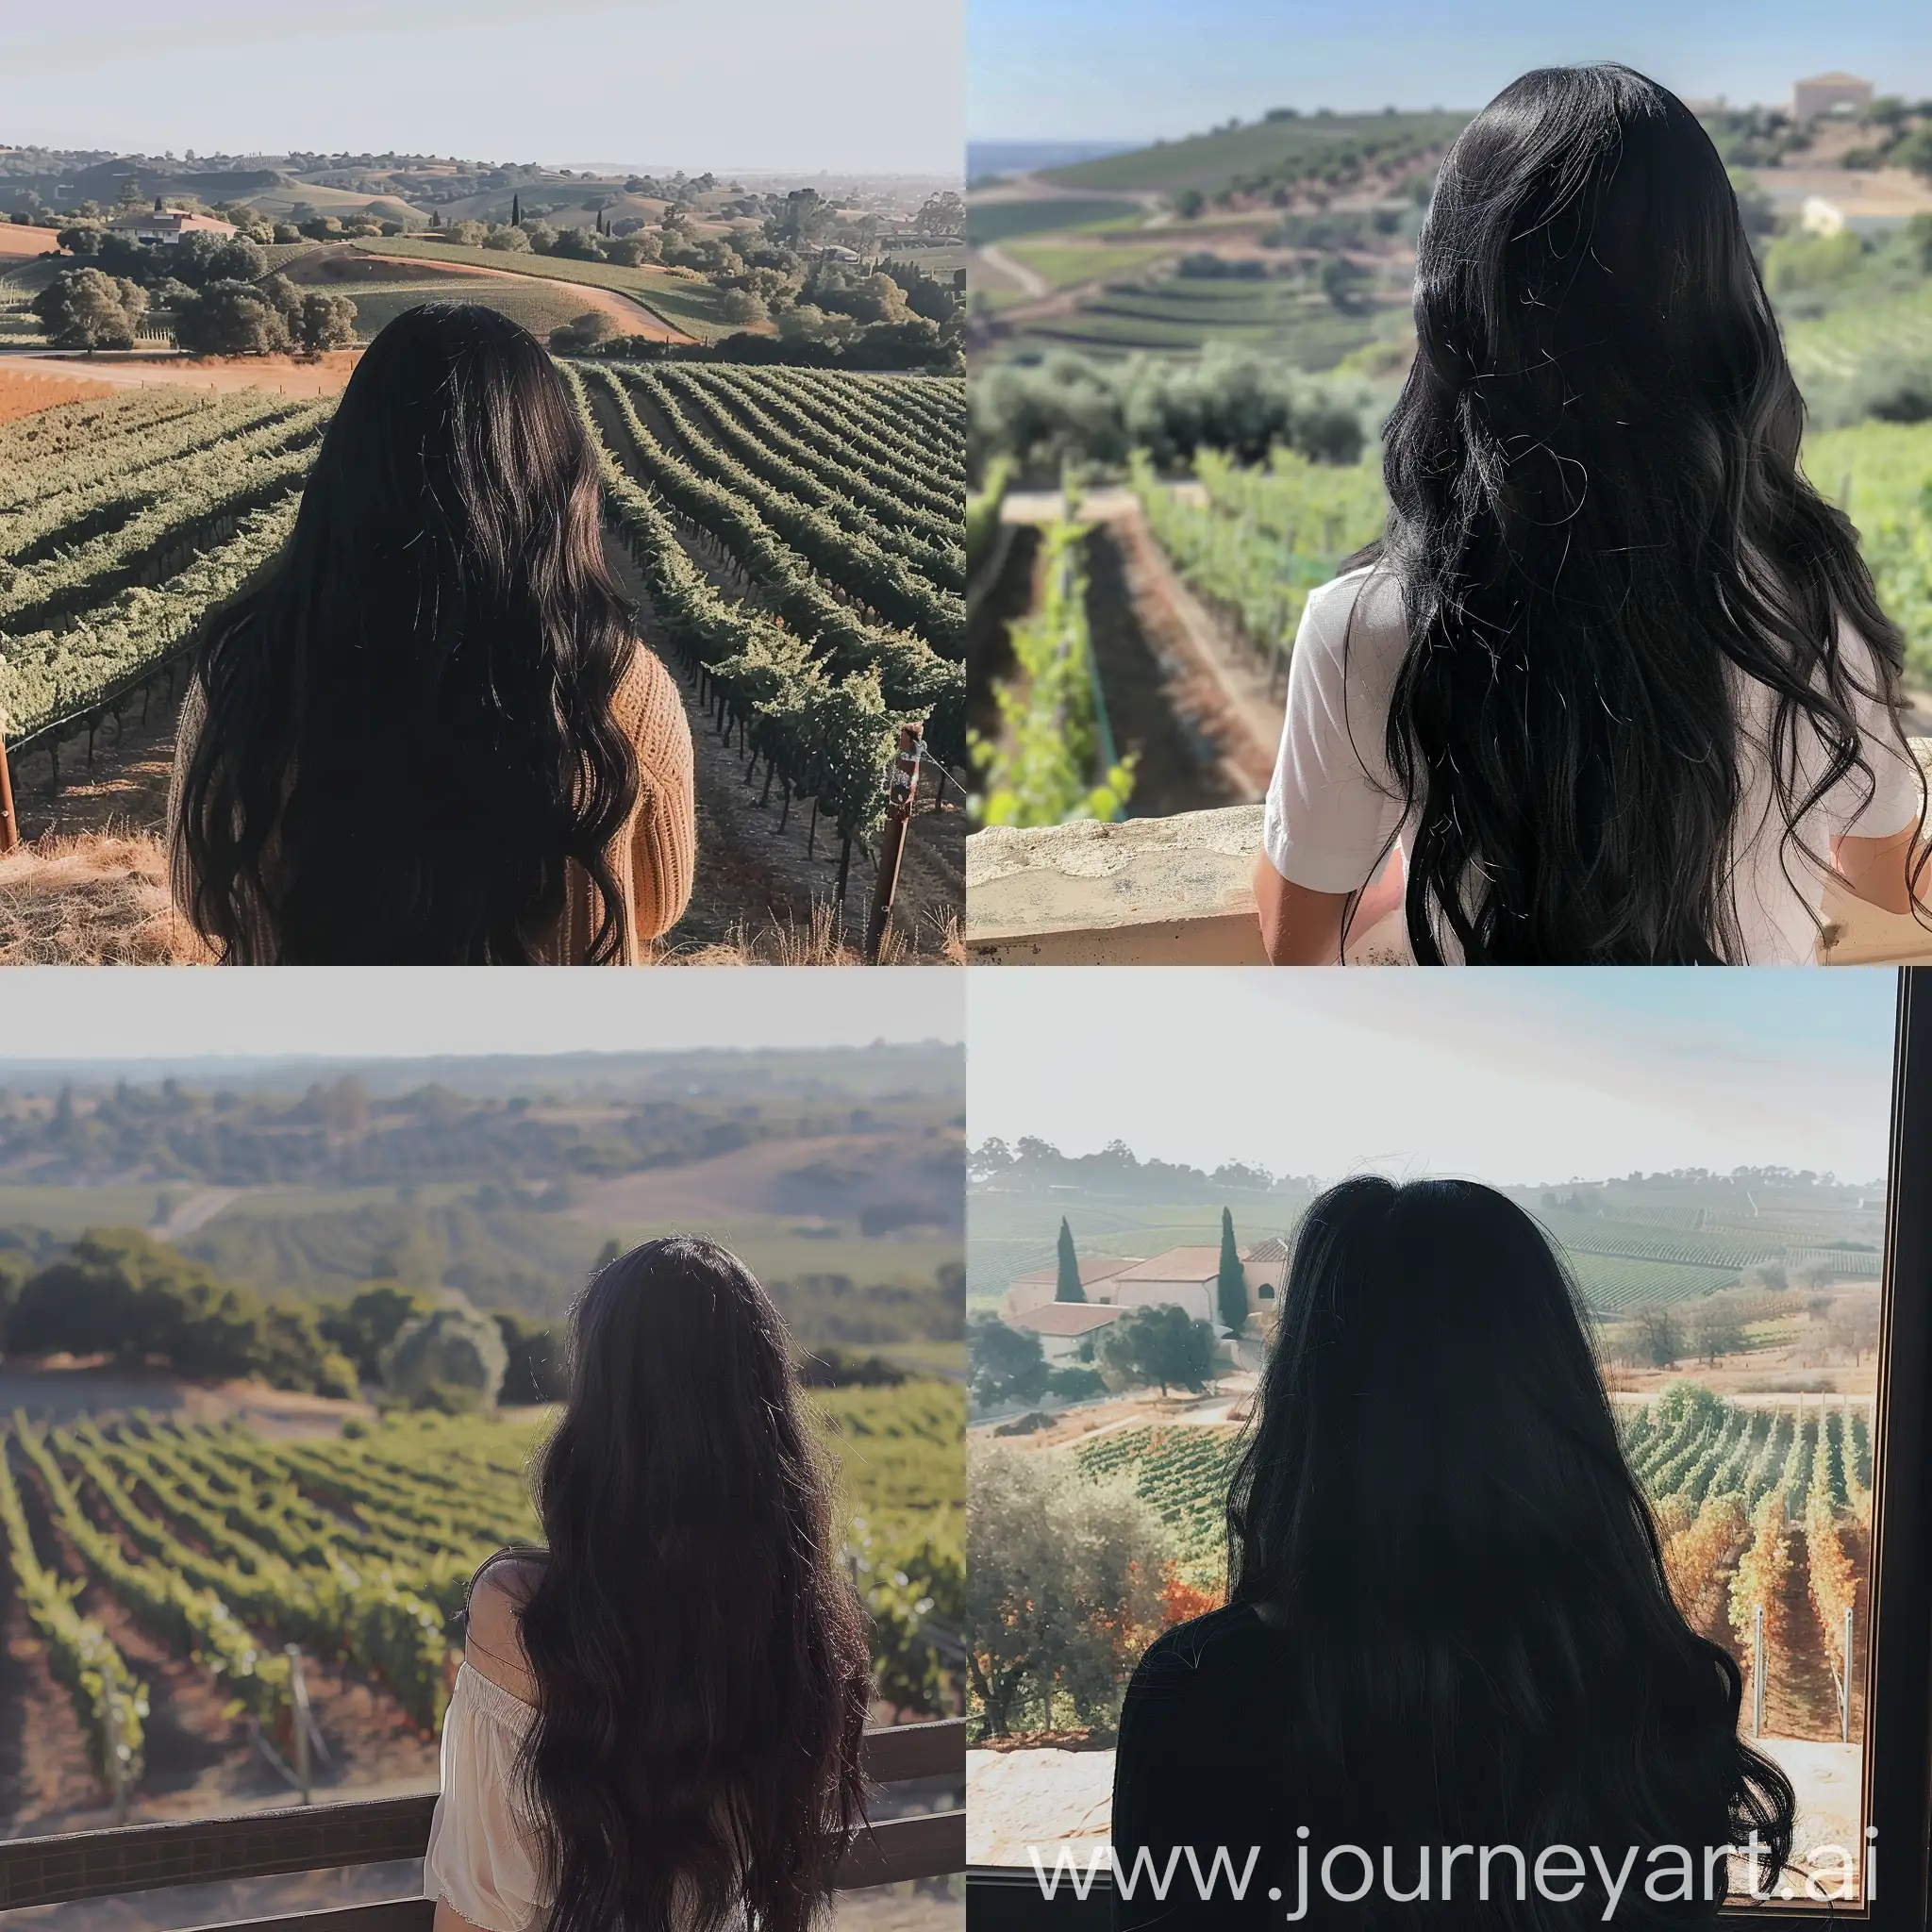 Aesthetic instagram picture real person, girl with long black hair looking out at a vineyard